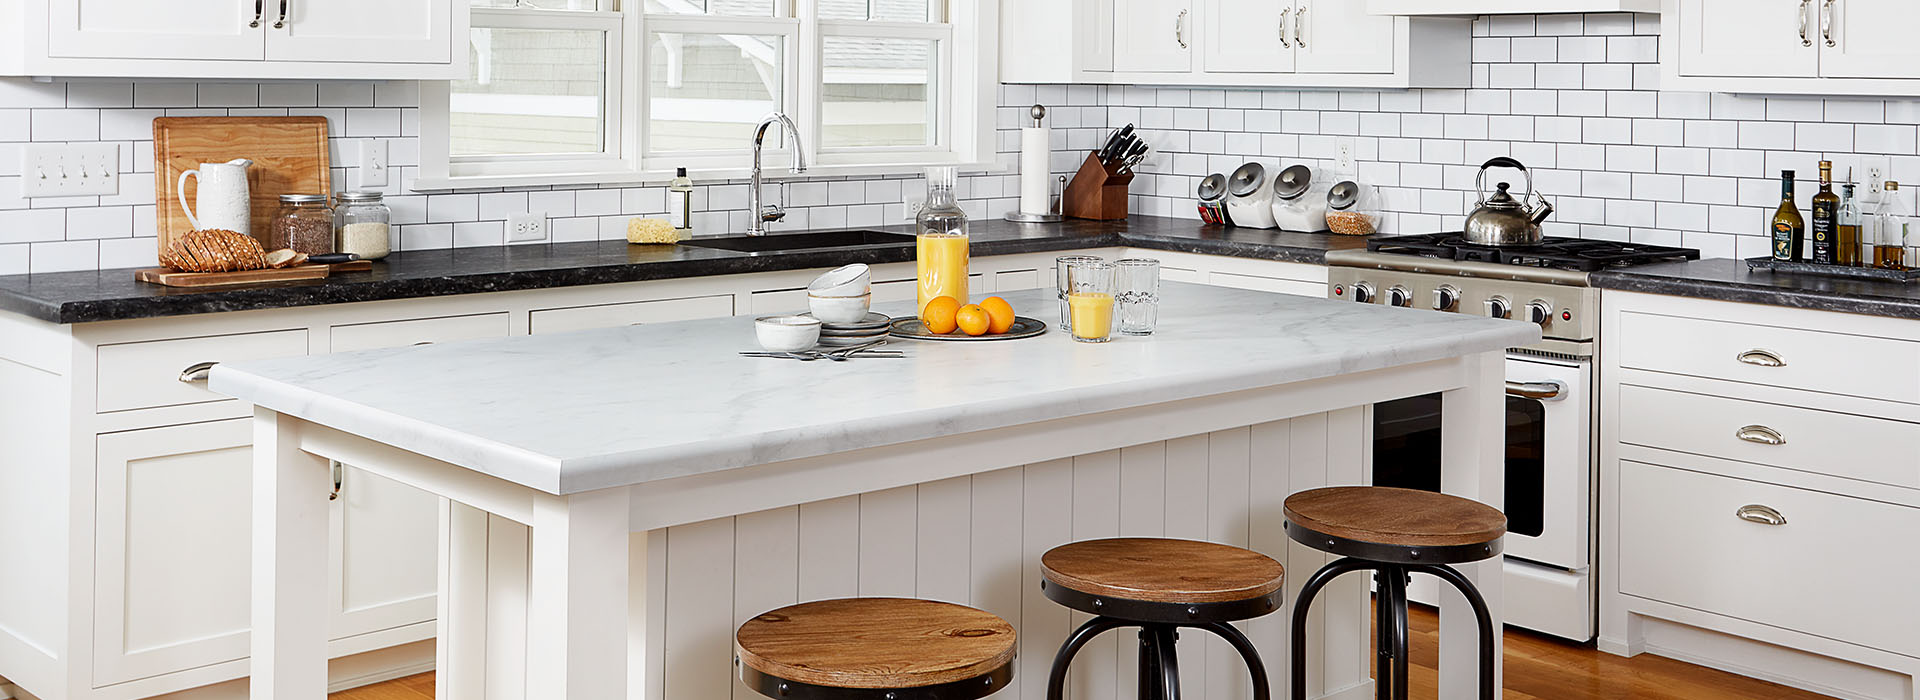 Kitchen countertops made with HPL Laminates from the 2020 Living Impressions™ collection by Formica Group : kitchen island countertop made 180fx® Laminate 5018-11 Calacatta Cava and kitchen countertop made with Formica® Laminate 5019-34 Black Bardiglio